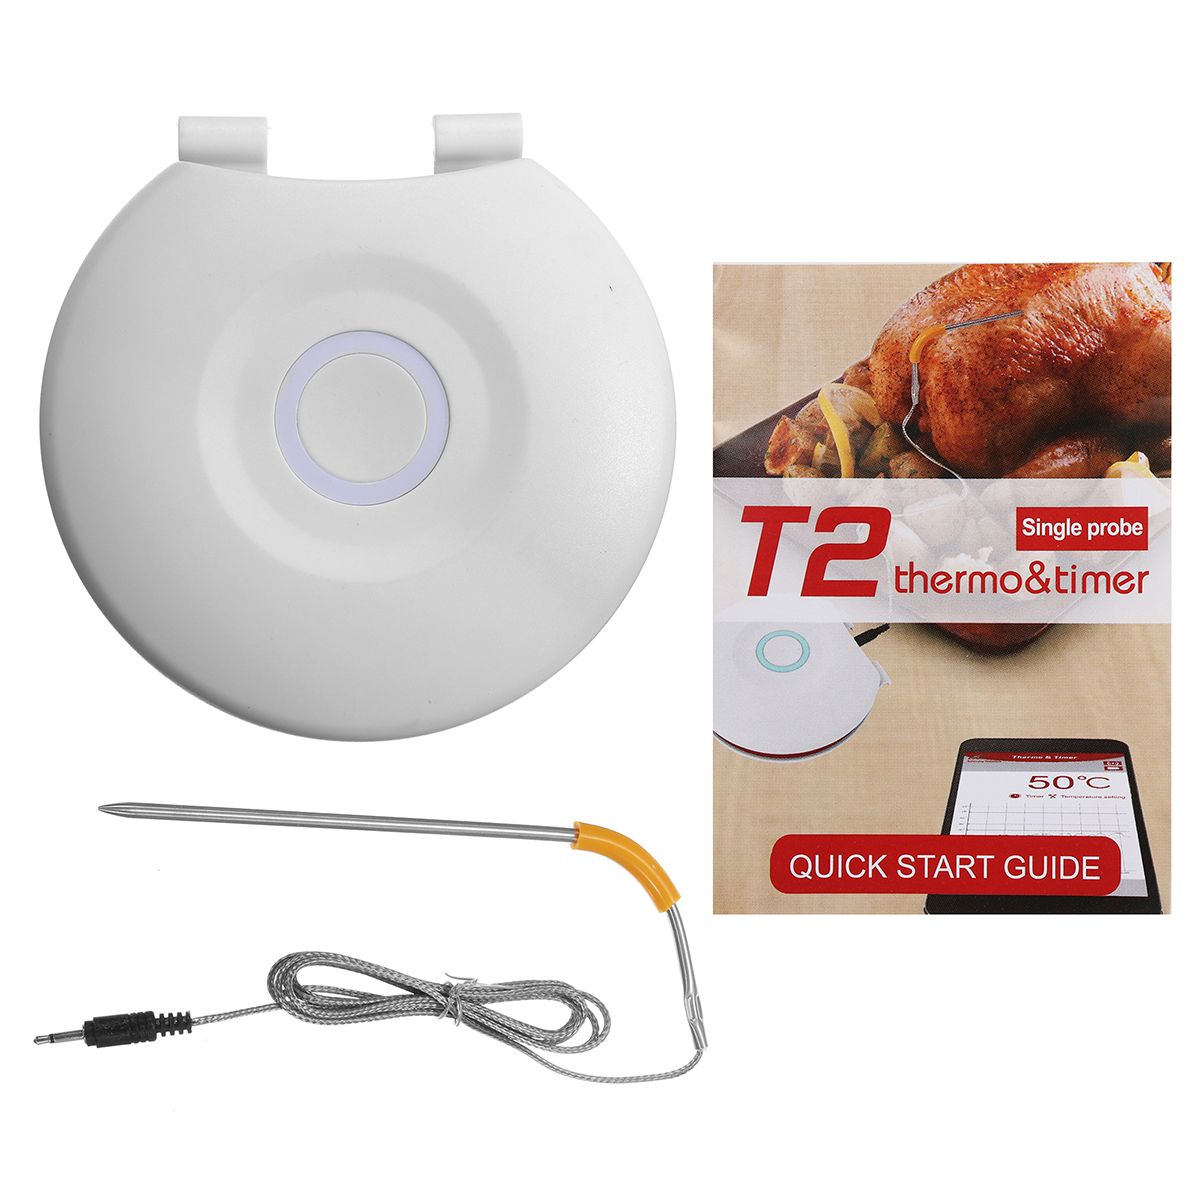 Digital-Cooking-Meat-Thermometer-bluetooth-Wireless-BBQ-Sensor-Smoke-for-Kitchen-1299055